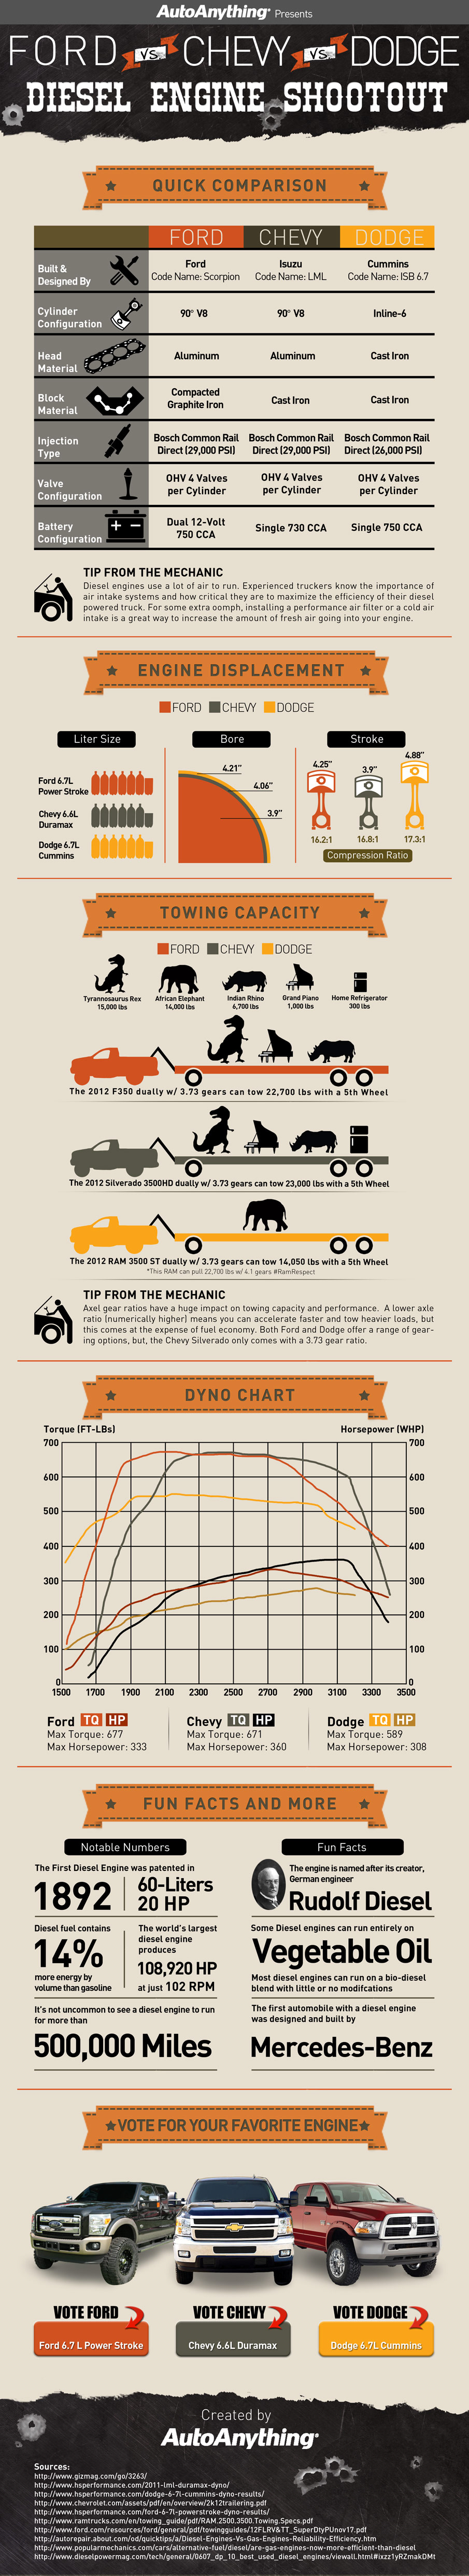 Ford and chevy facts #9